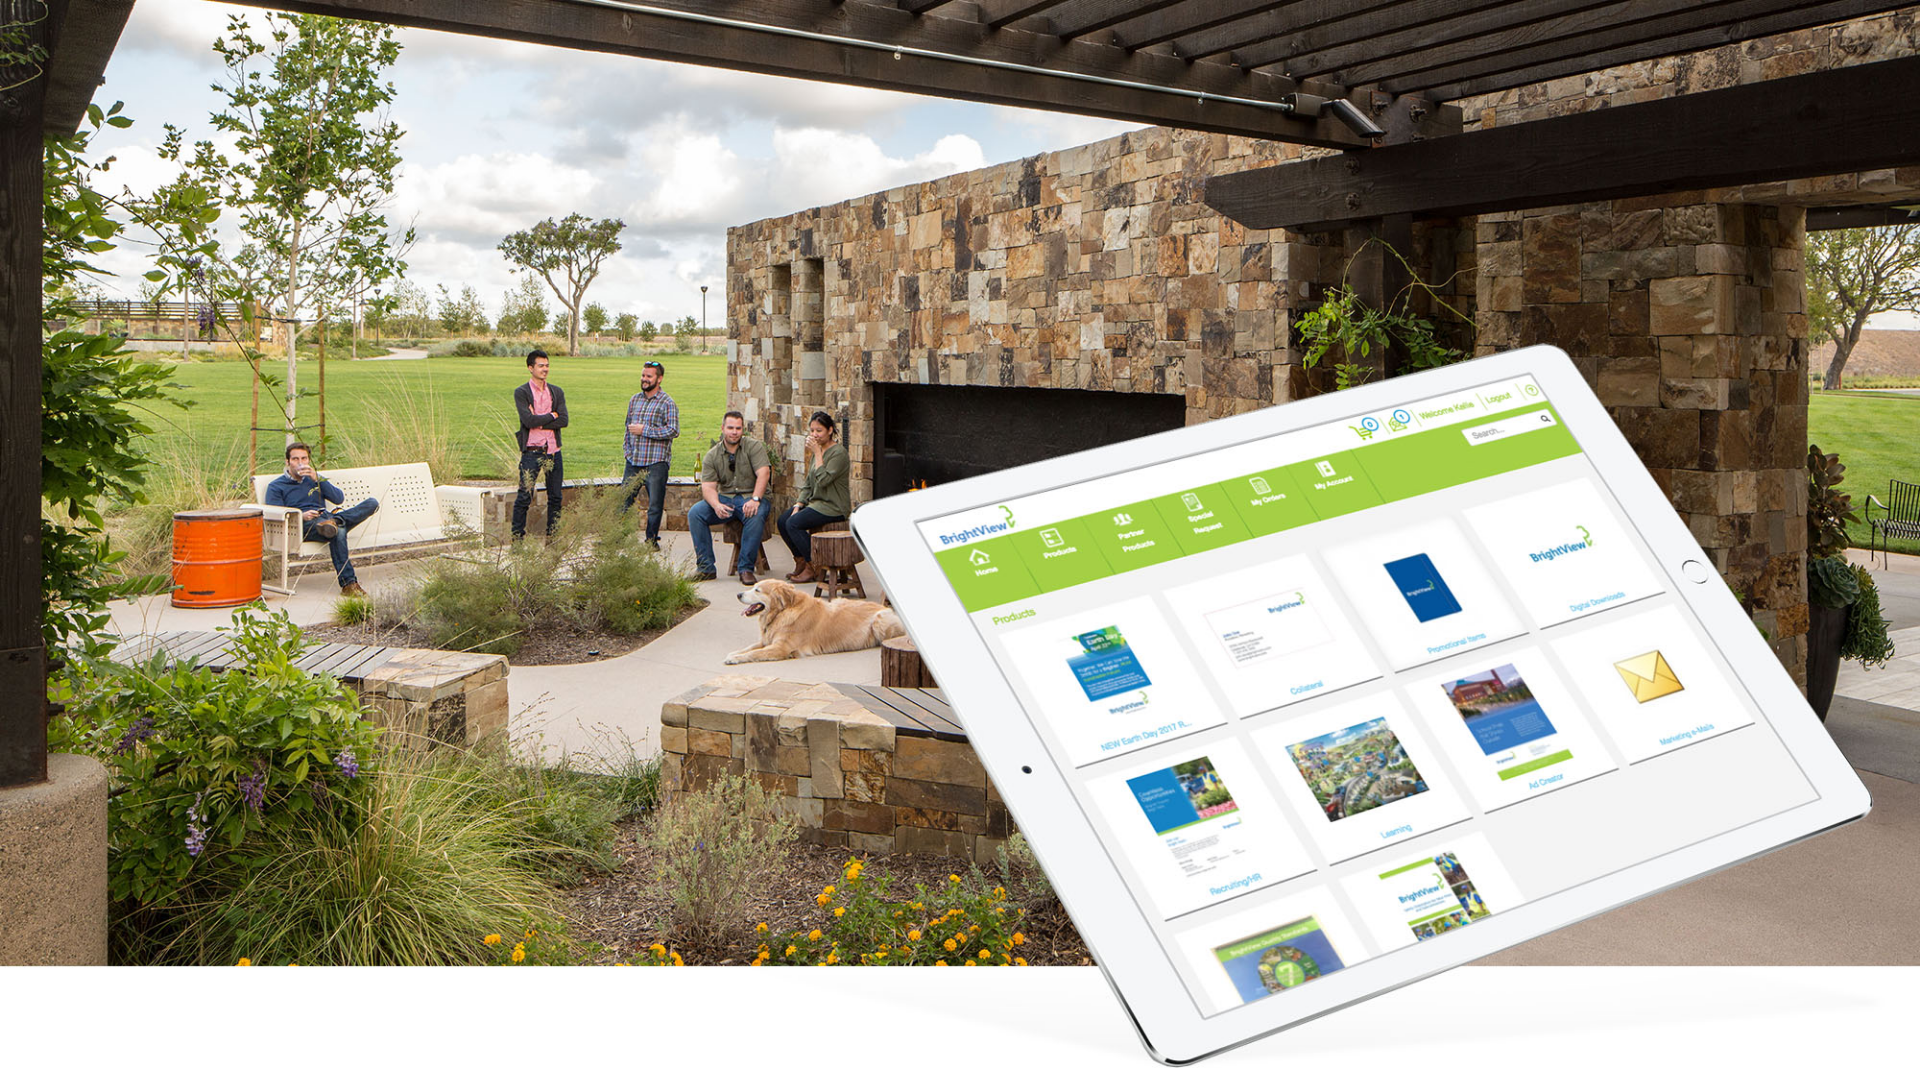 Outdoor relaxation and connectivity: a group of people enjoy a casual gathering in a store-like setting with BrightView greenery, comfortably utilizing a mixture of seating arrangements, while a foreground overlay shows a tablet interface